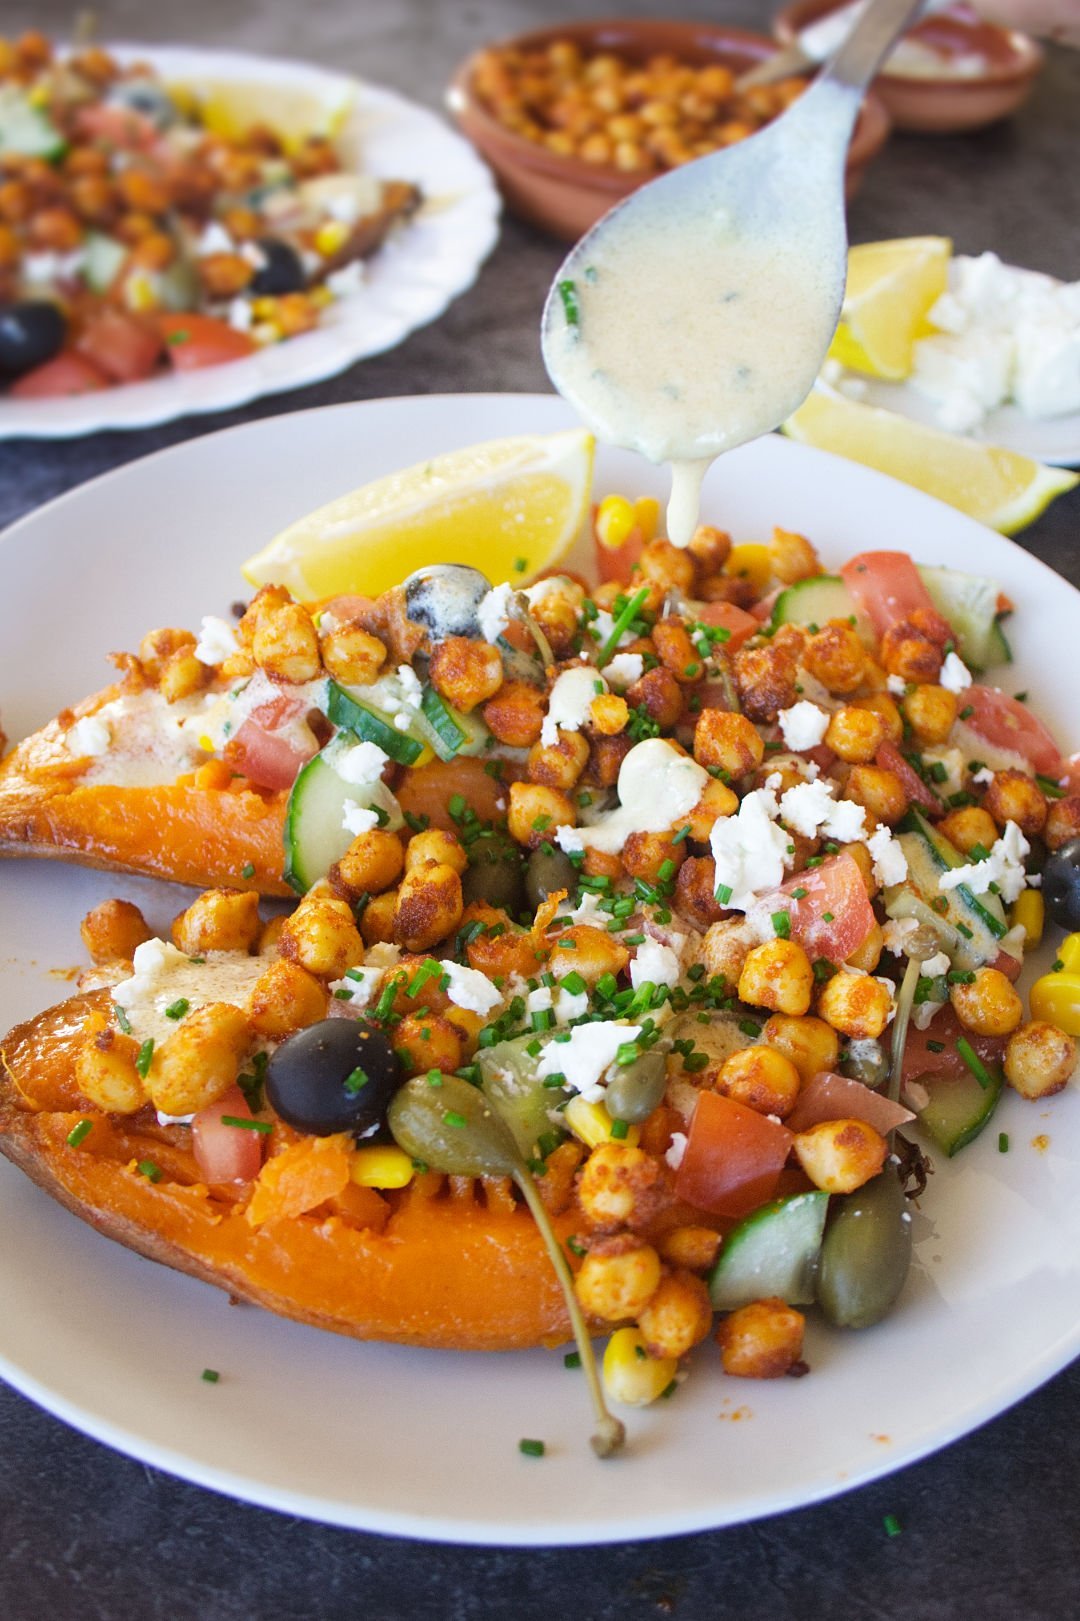 a large baked sweet potato sits on a white plate with plenty of Mediterranean inspired toppings